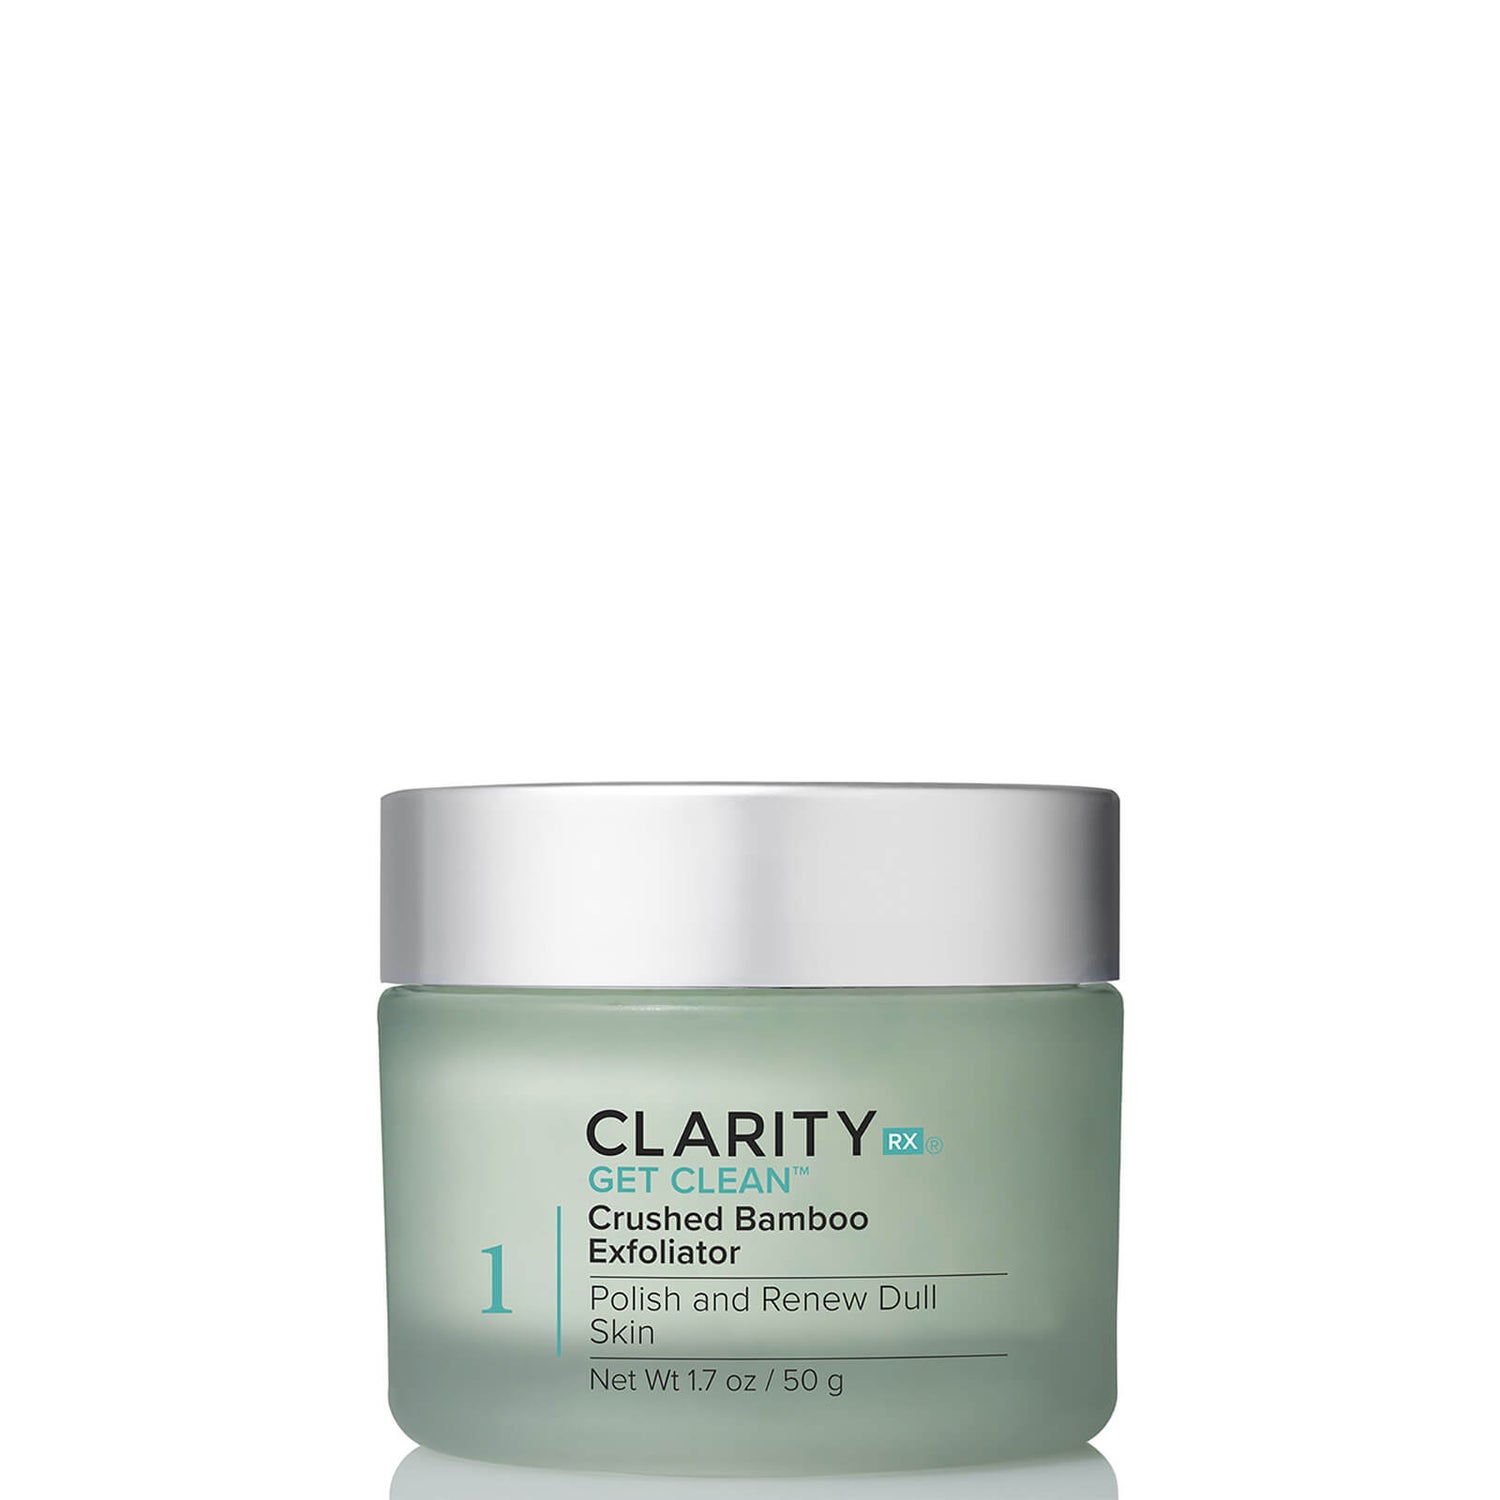 ClarityRx Get Clean Crushed Bamboo Exfoliator (1.7 oz.)